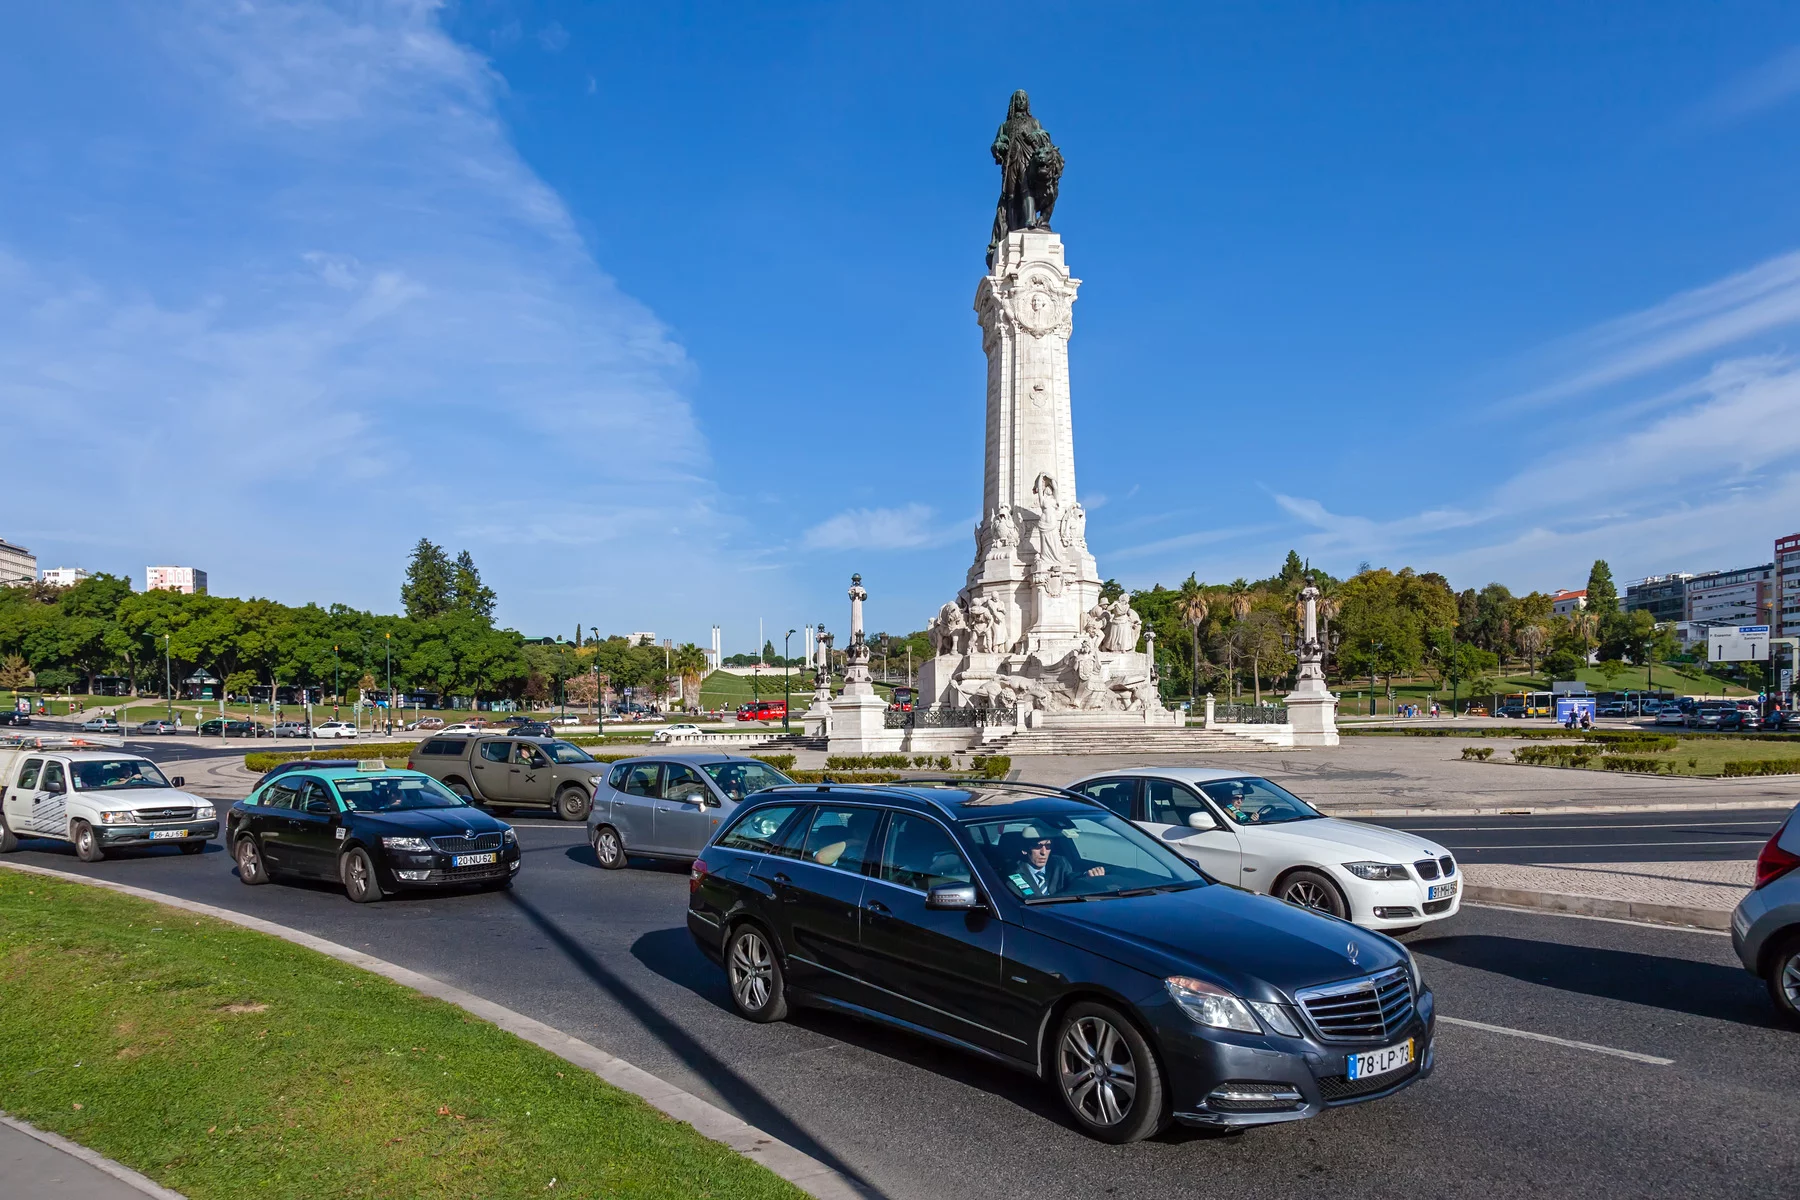 Cars on the Marques de Pombal Roundabout in Lisbon